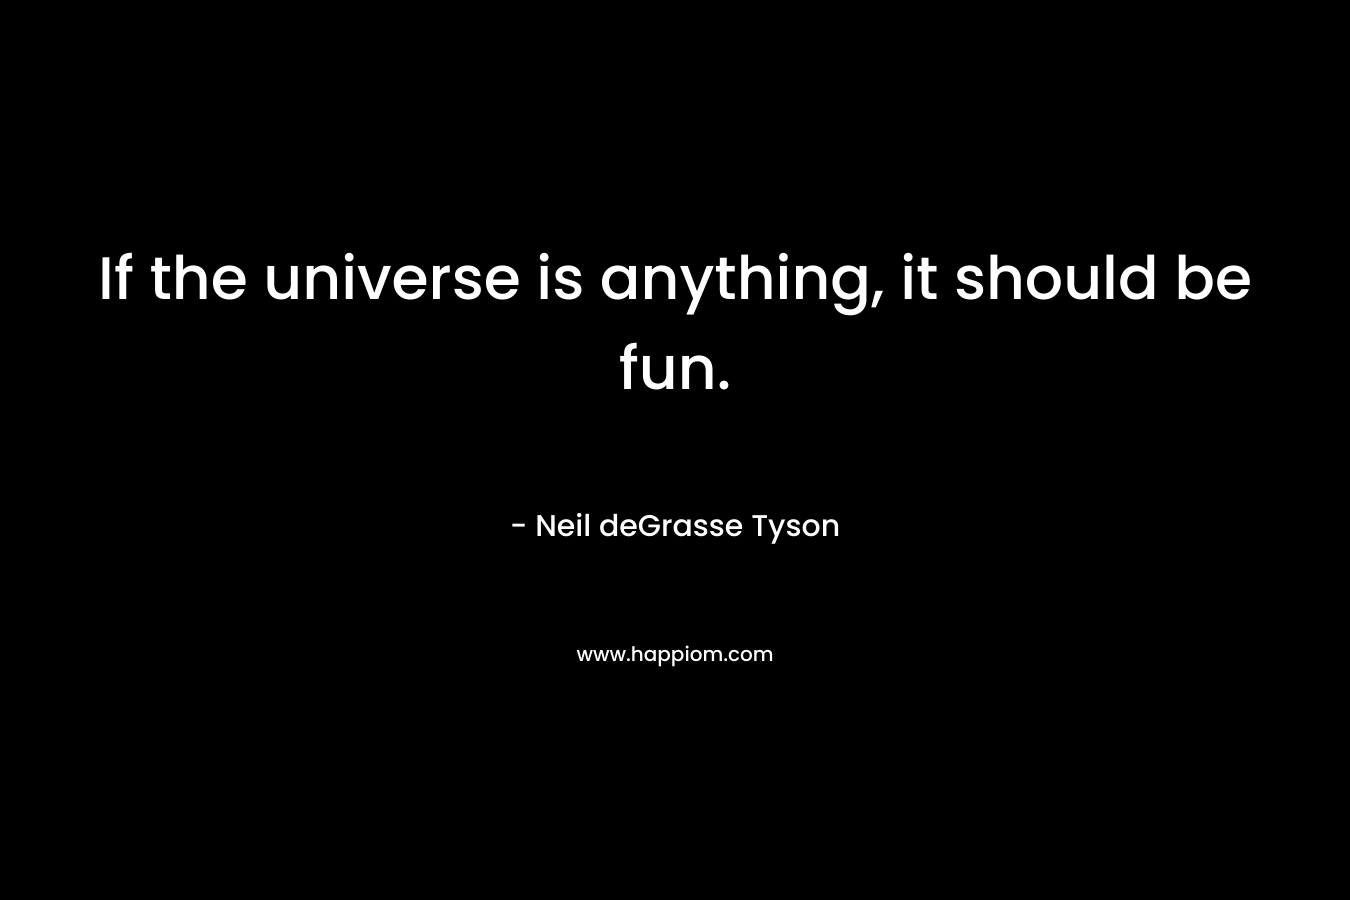 If the universe is anything, it should be fun.